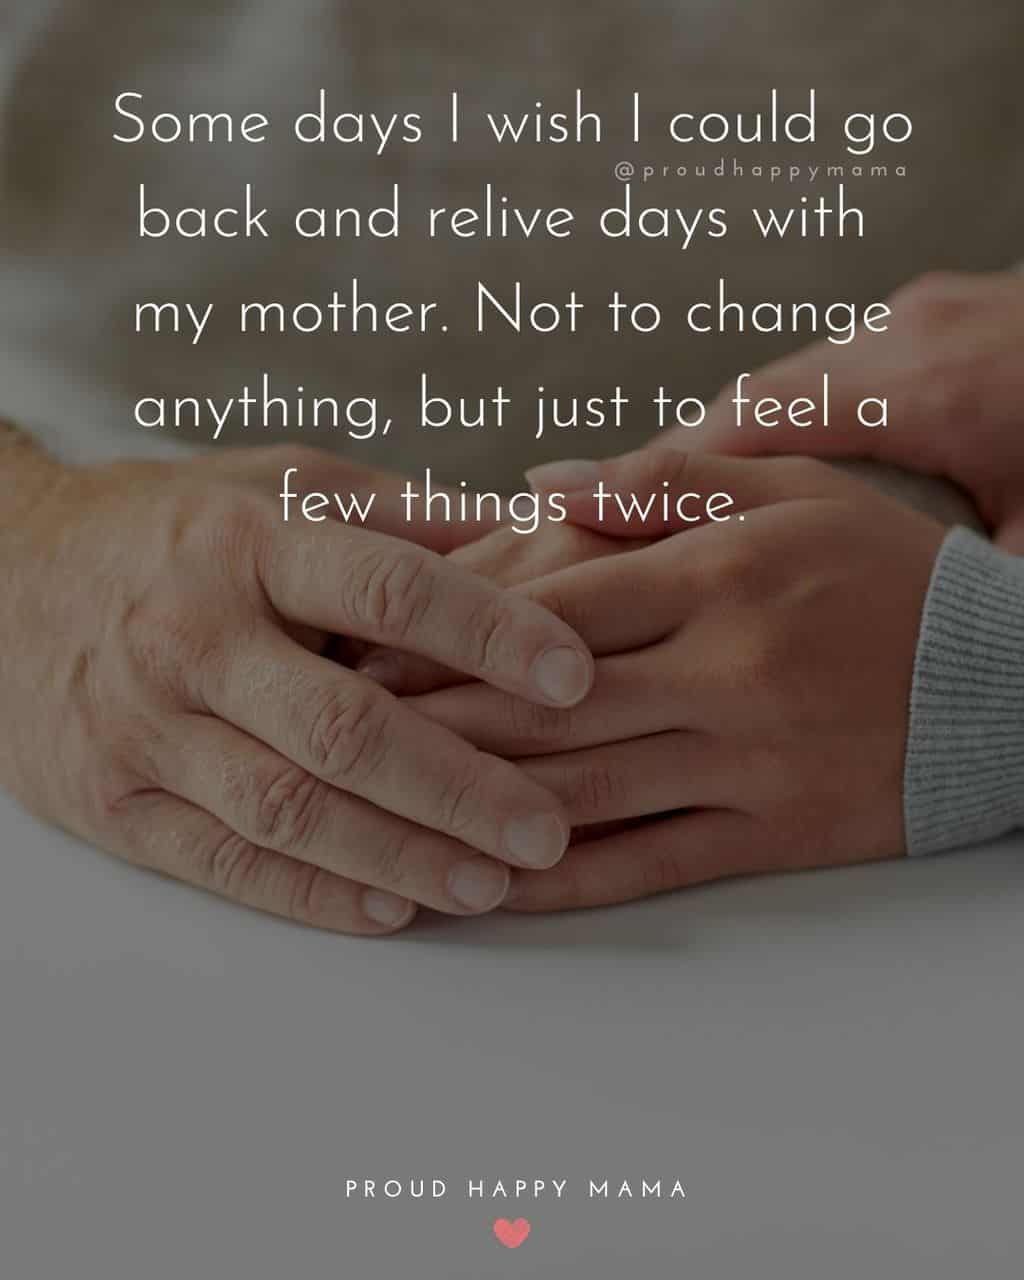 Daughter holing mother's hand with missing mom quote heaven text overlay, ‘Some days I wish I could go back and relive days with my mother. Not to change anything, but just to feel a few things twice.’